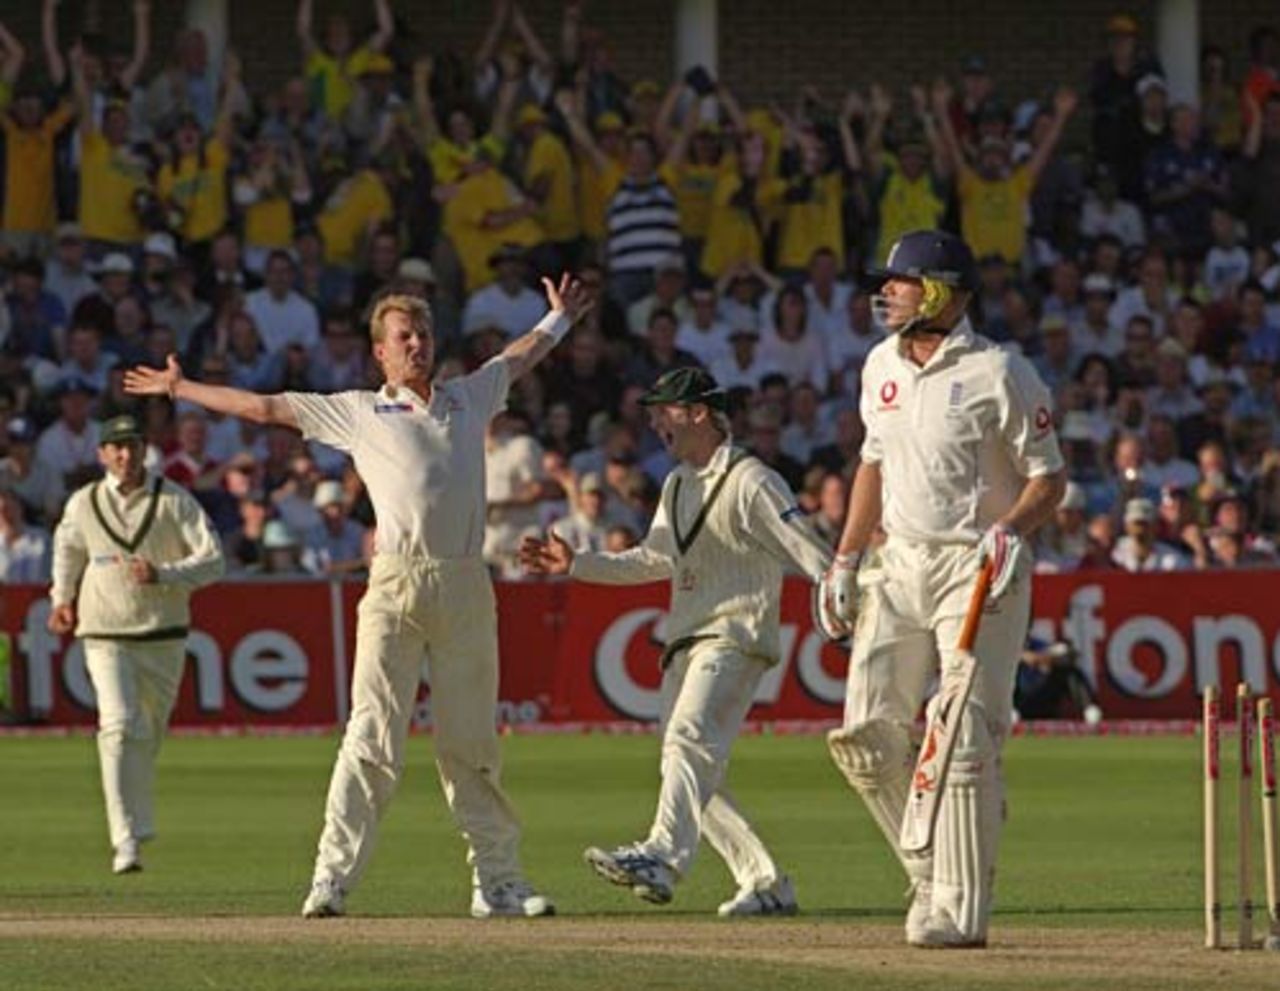 Brett Lee bowls an incredulous Andrew Flintoff - 111 for 6, England v Australia, 4th Test, Trent Bridge, August 28, 2005. The picture is taken from the book <I>Ashes in Focus</I> published by A&C Black